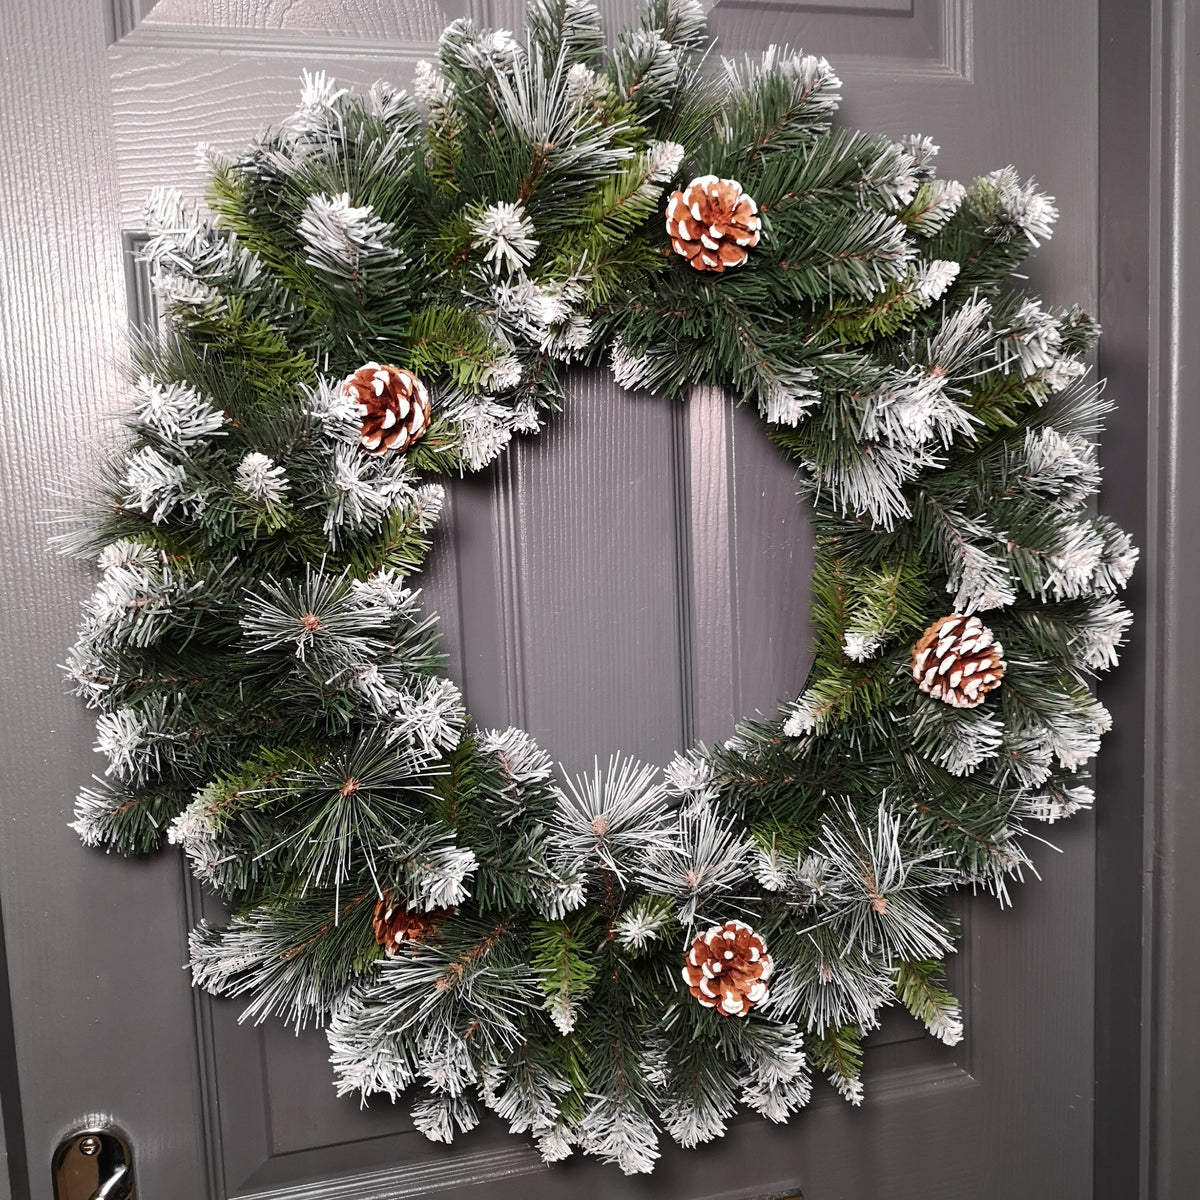 60cm Frosted Glacier Snow Tipped Christmas Wreath with Pine Cones